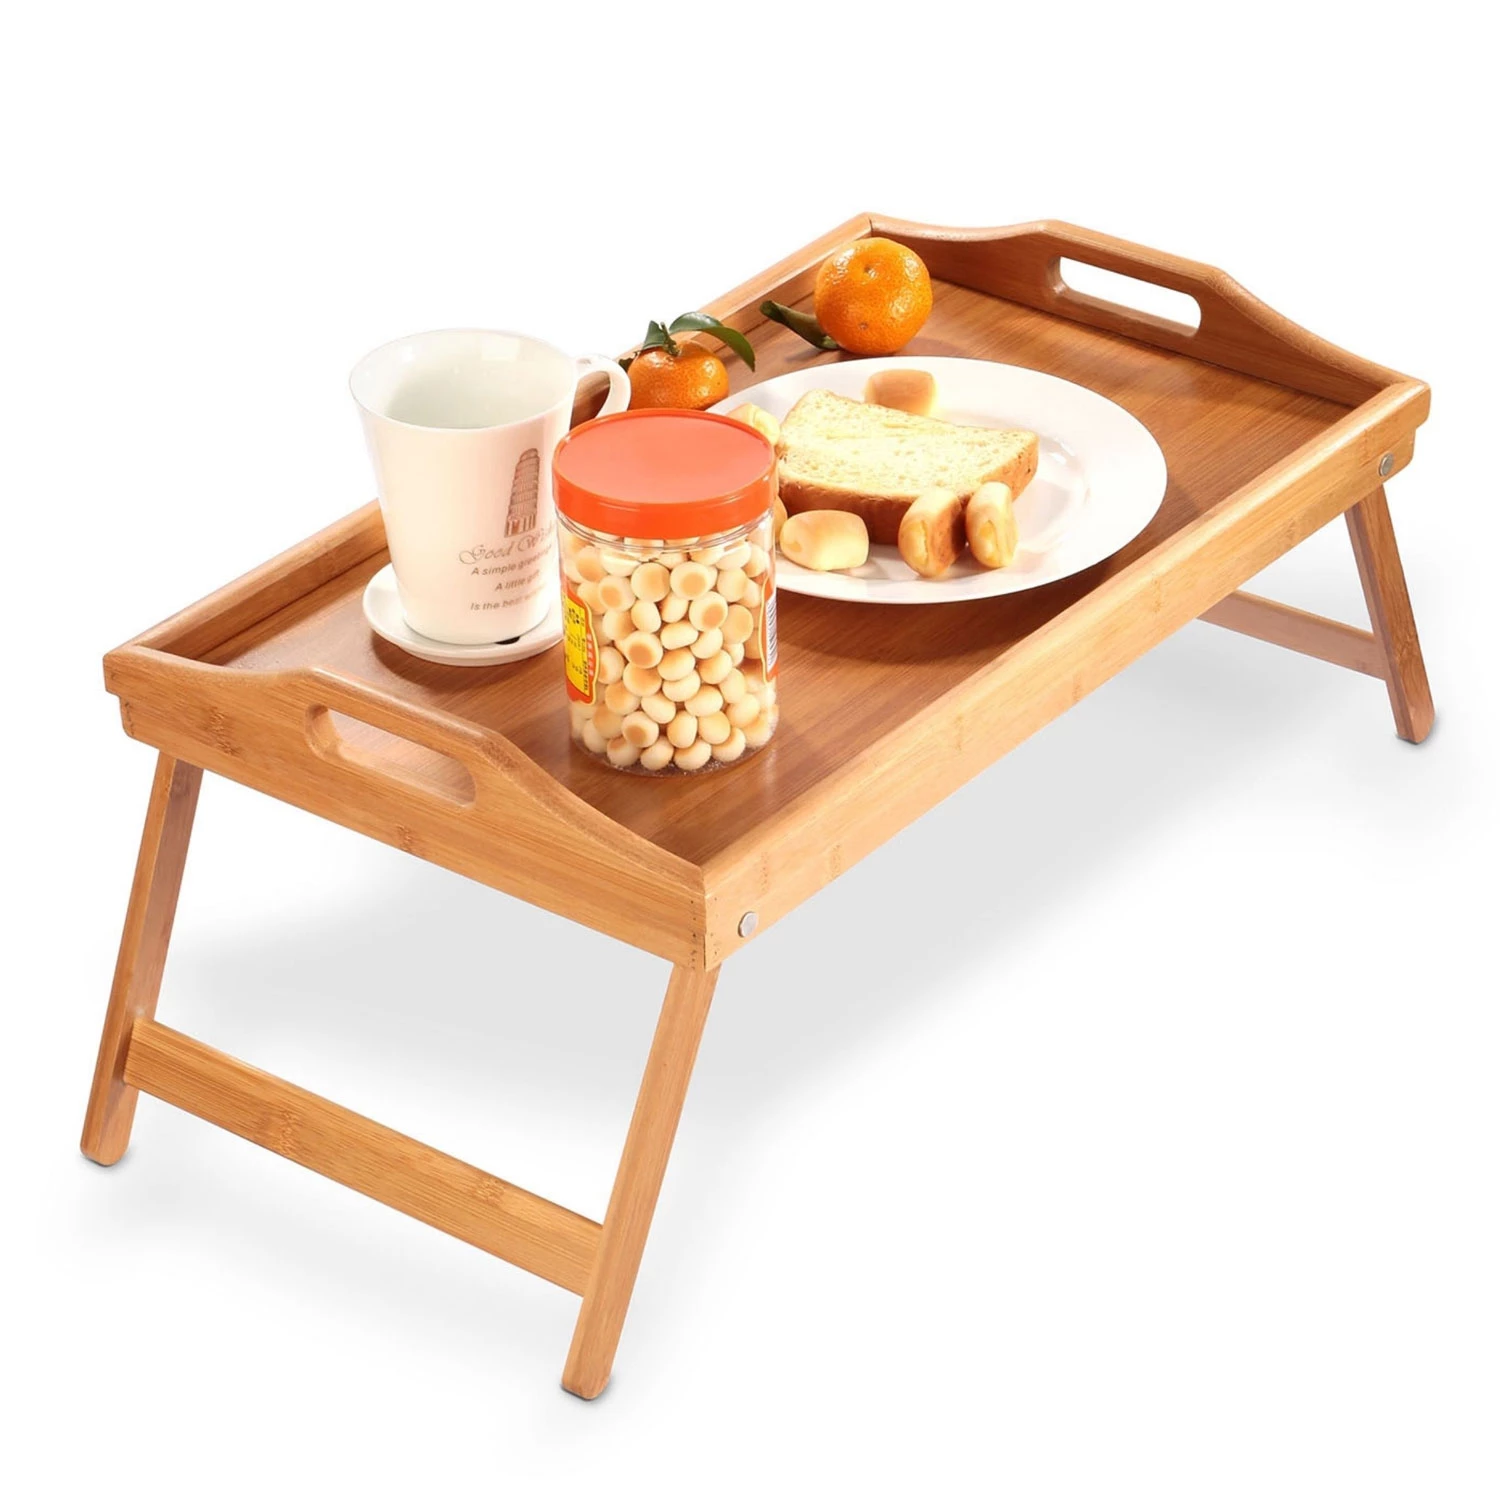 Bamboo Folding Bed Tray Table with Handles - Serving, Snack, Breakfast Tray